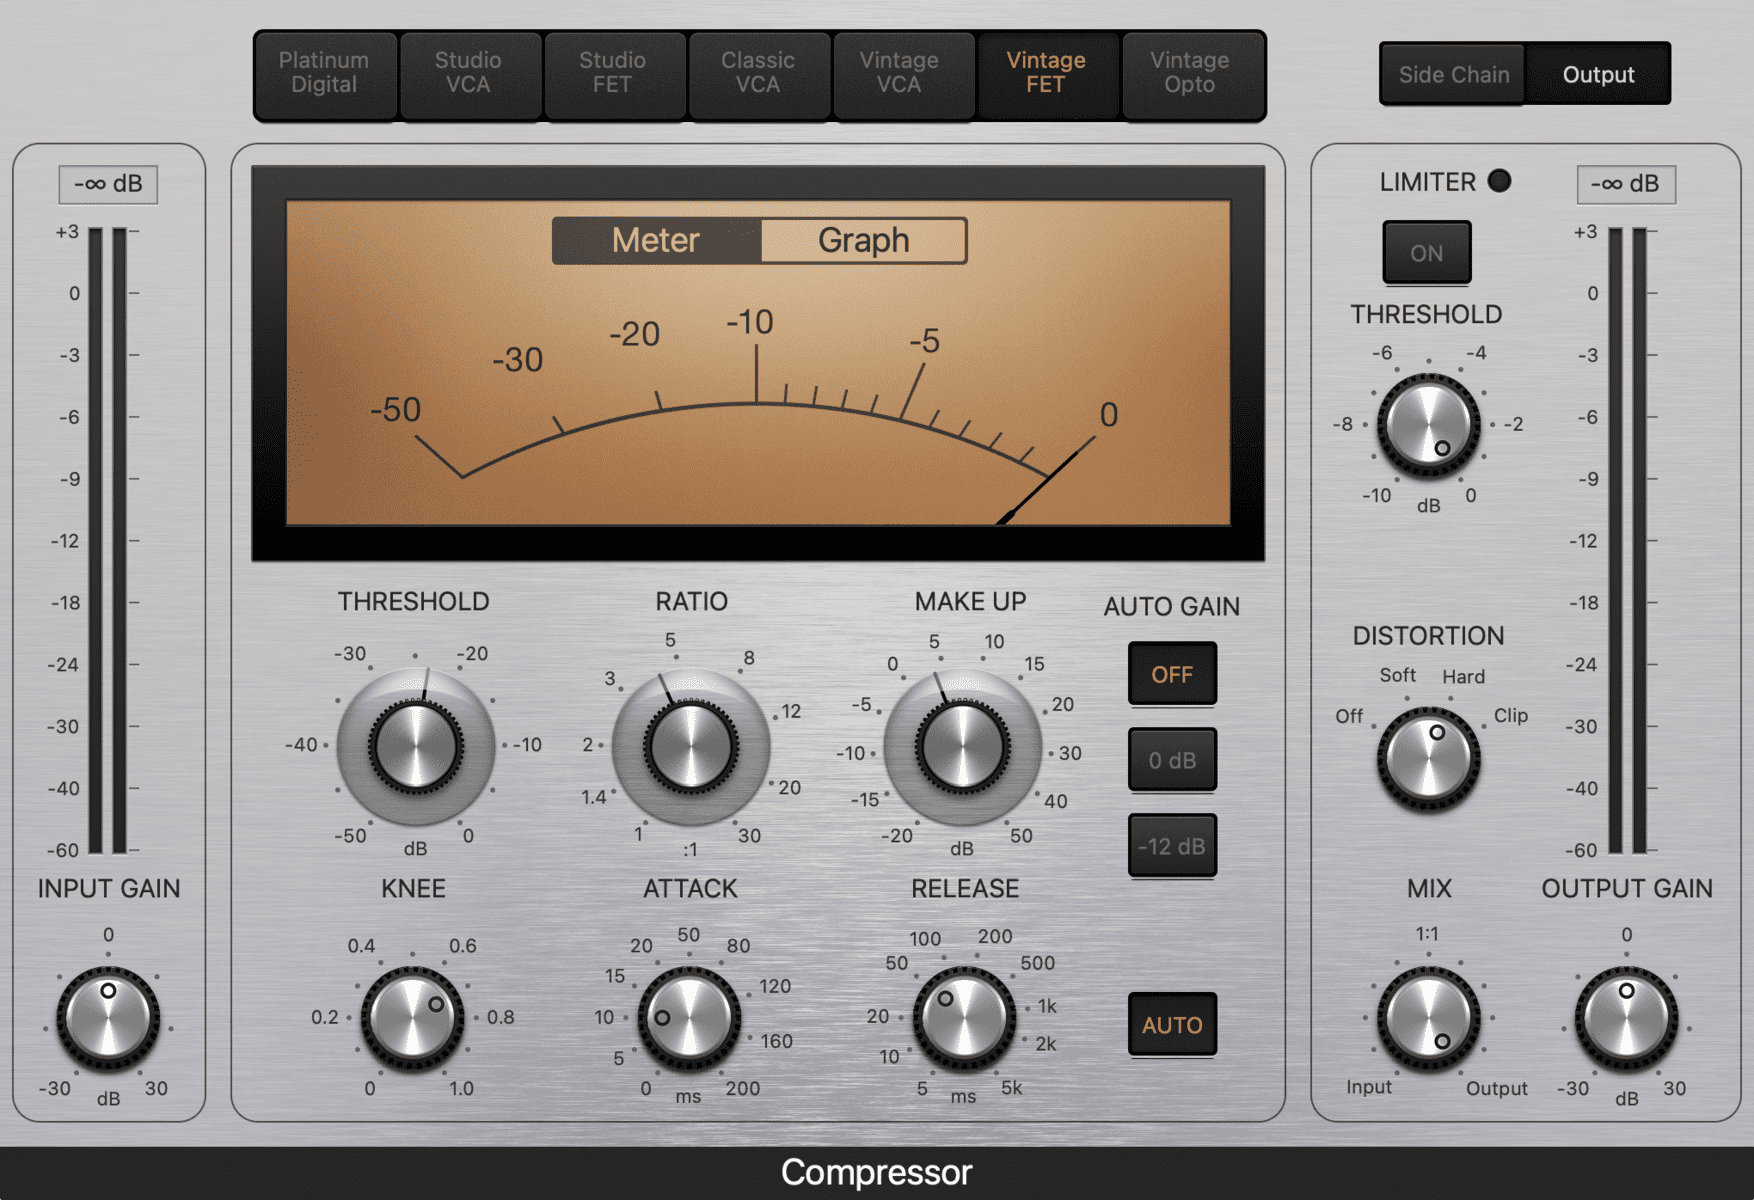 A picture of a compressor from Logic Pro X. The interface shows various controls such as threshold, ratio, attack, release, and makeup gain.